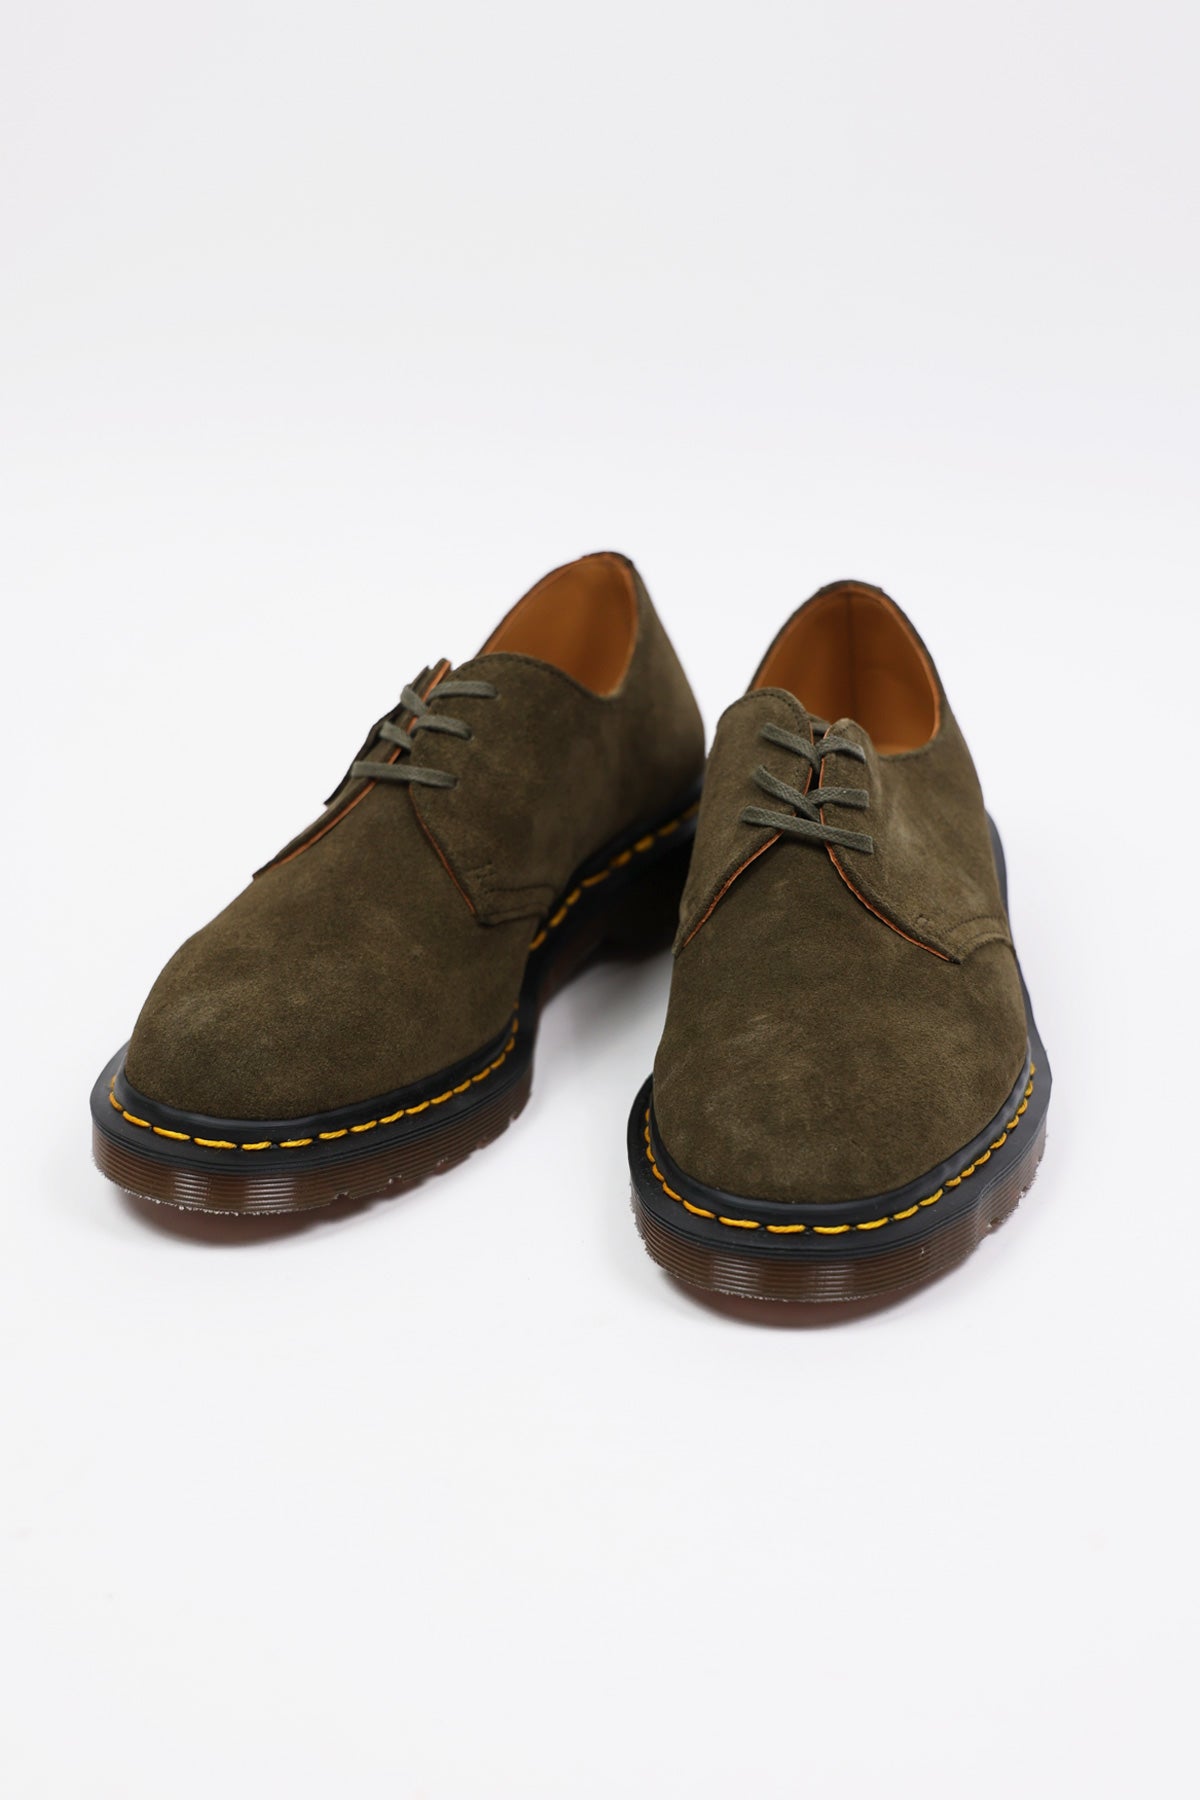 Dr. 1461 Shoe | Forest Buck Suede | Canoe Club